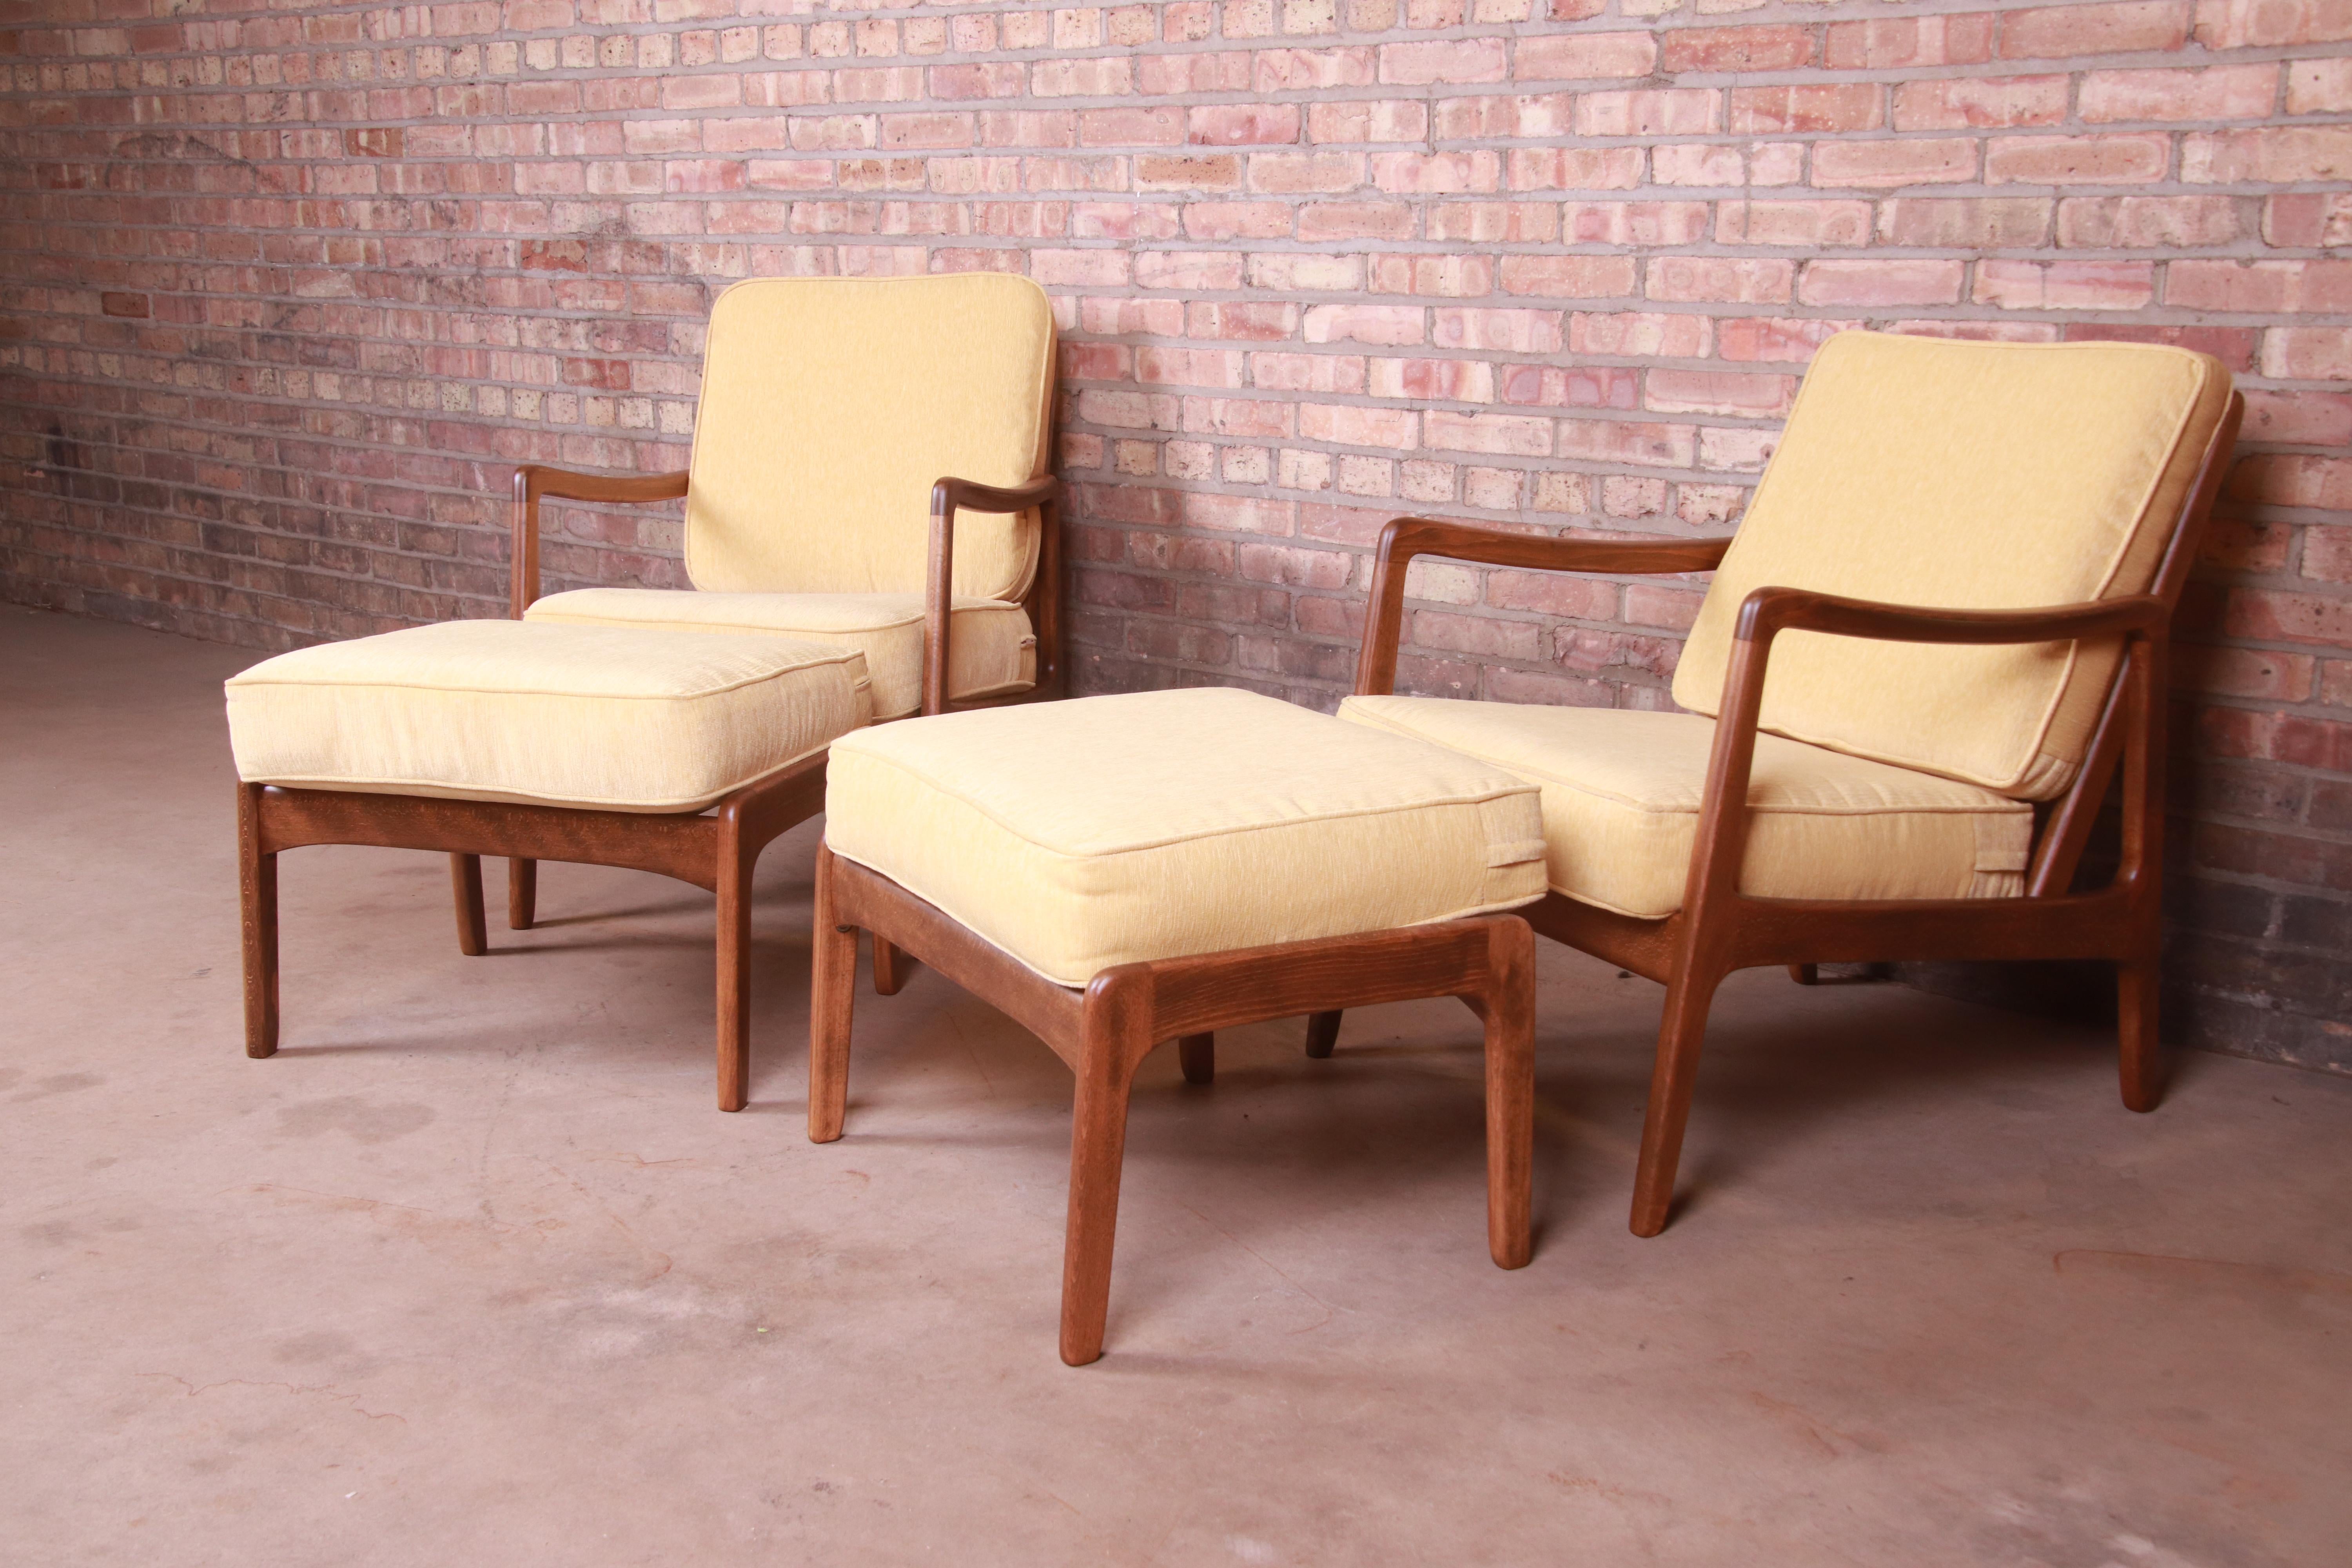 A gorgeous pair of mid-century Danish Modern club chairs or lounge chairs and ottomans

By Ole Wanscher for France & Daverkosen (retailed by John Stuart)

Denmark, 1950s

Solid Cuban mahogany frames, with yellow upholstered cushion seats and